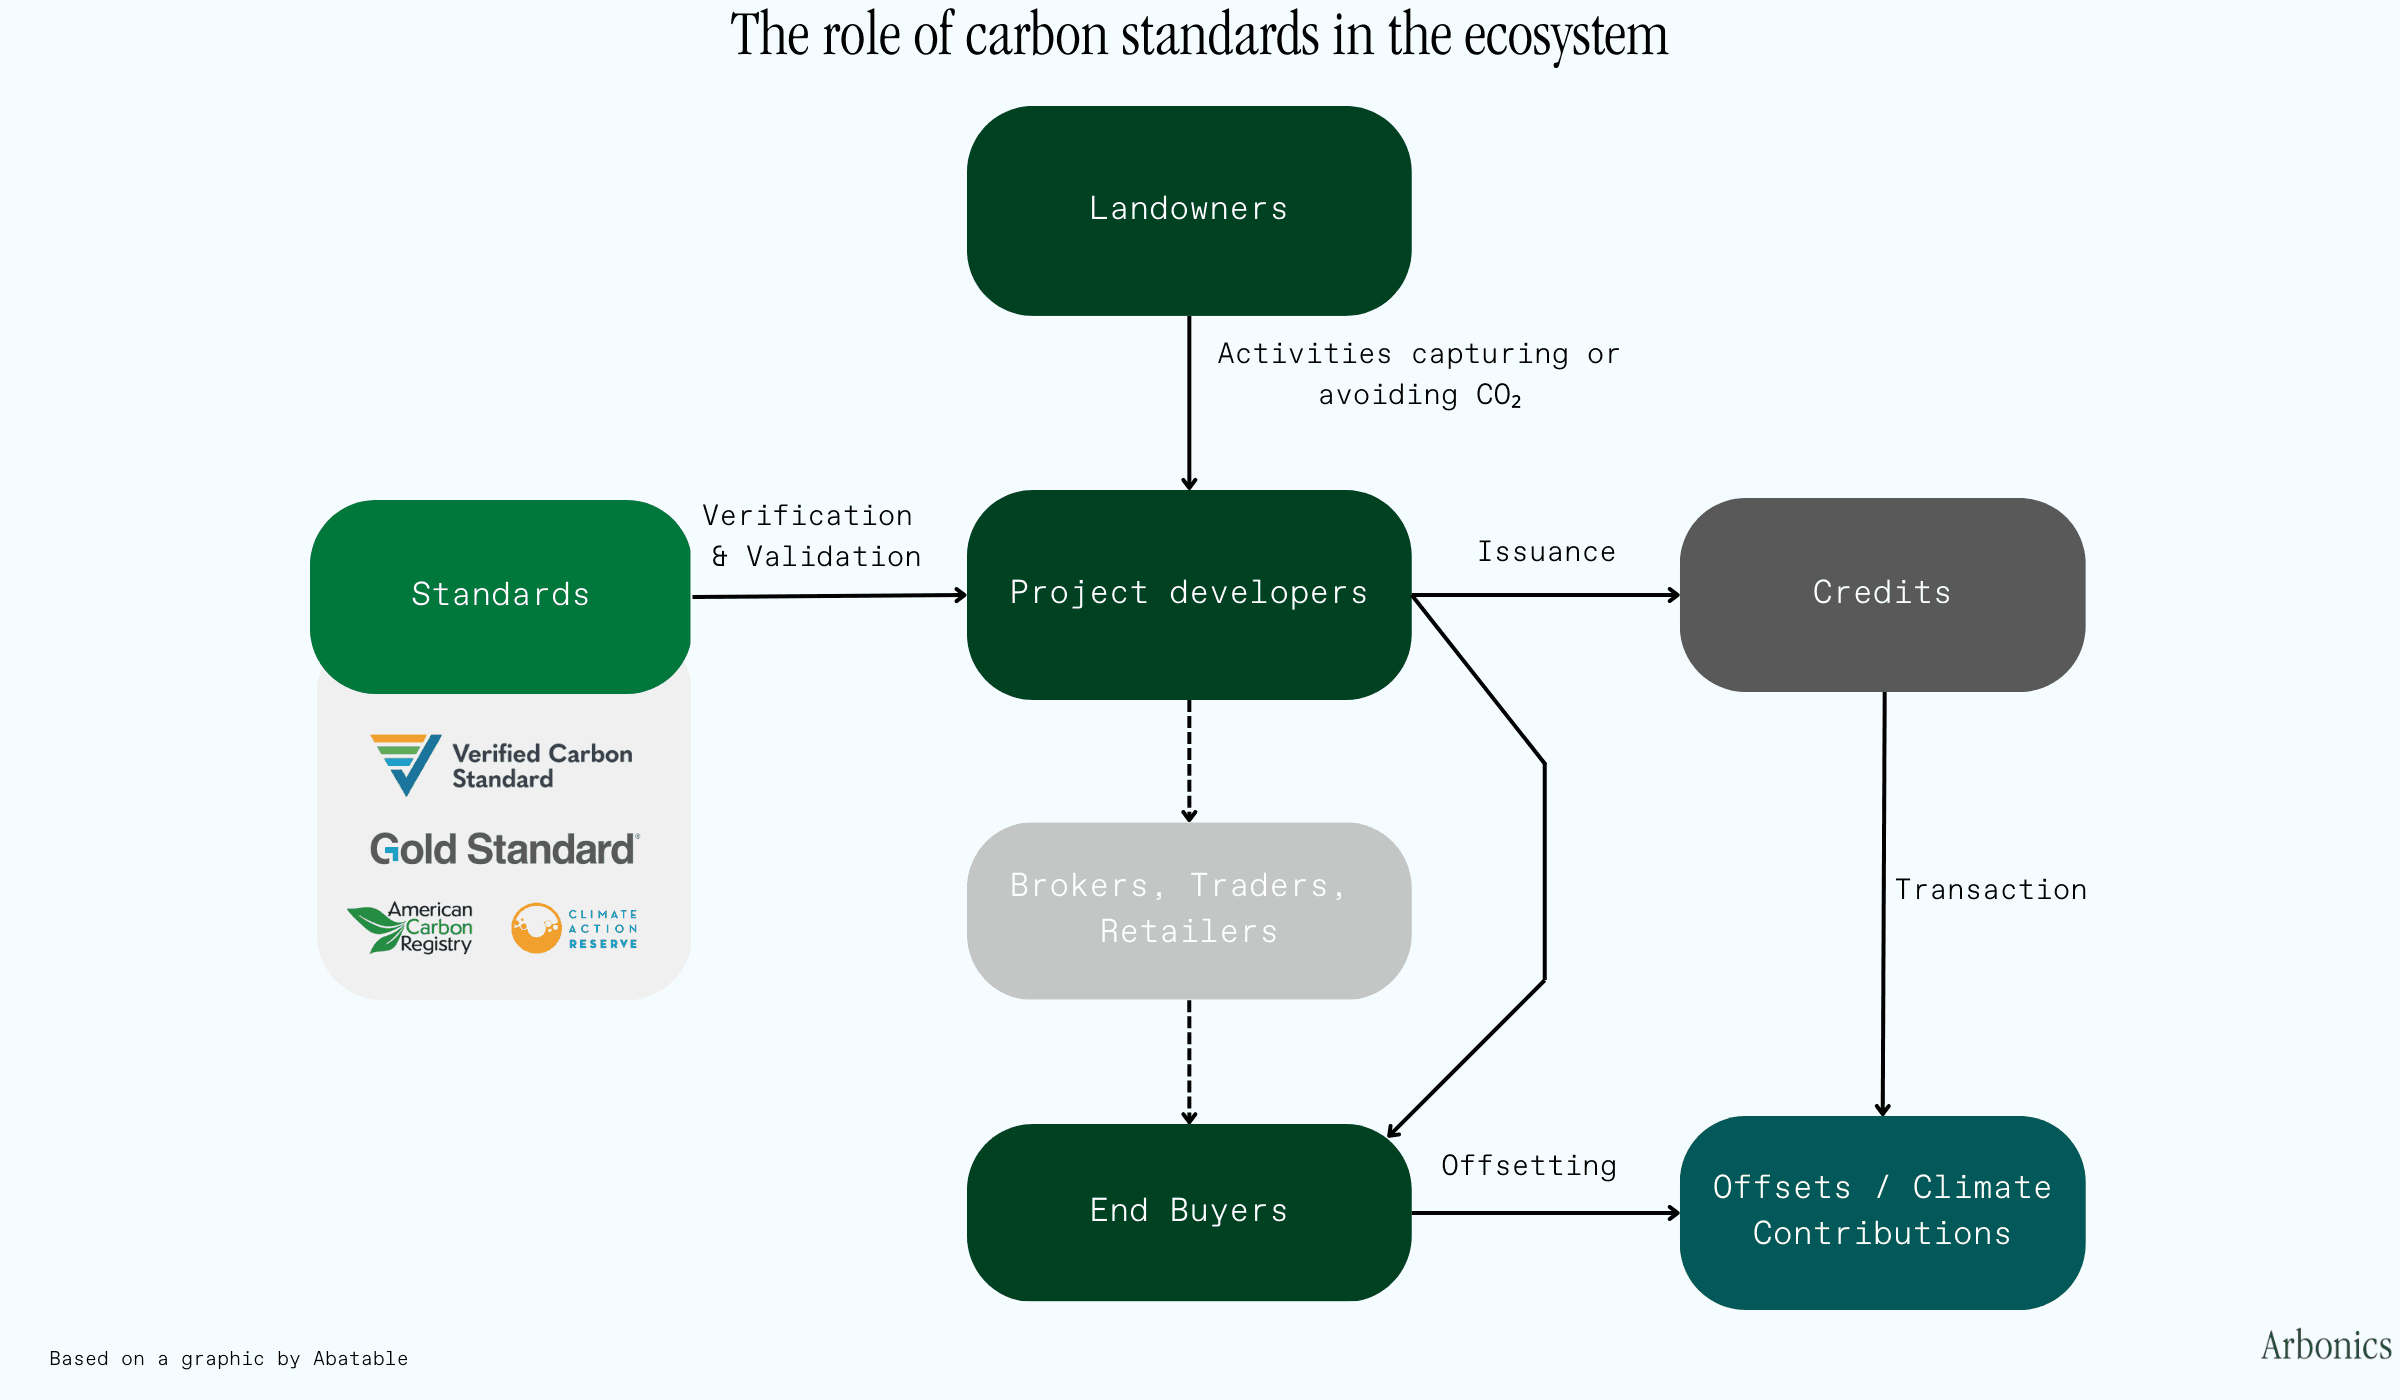 Overview of the carbon credit ecosystem, showing carbon standards, project developers, credits etc